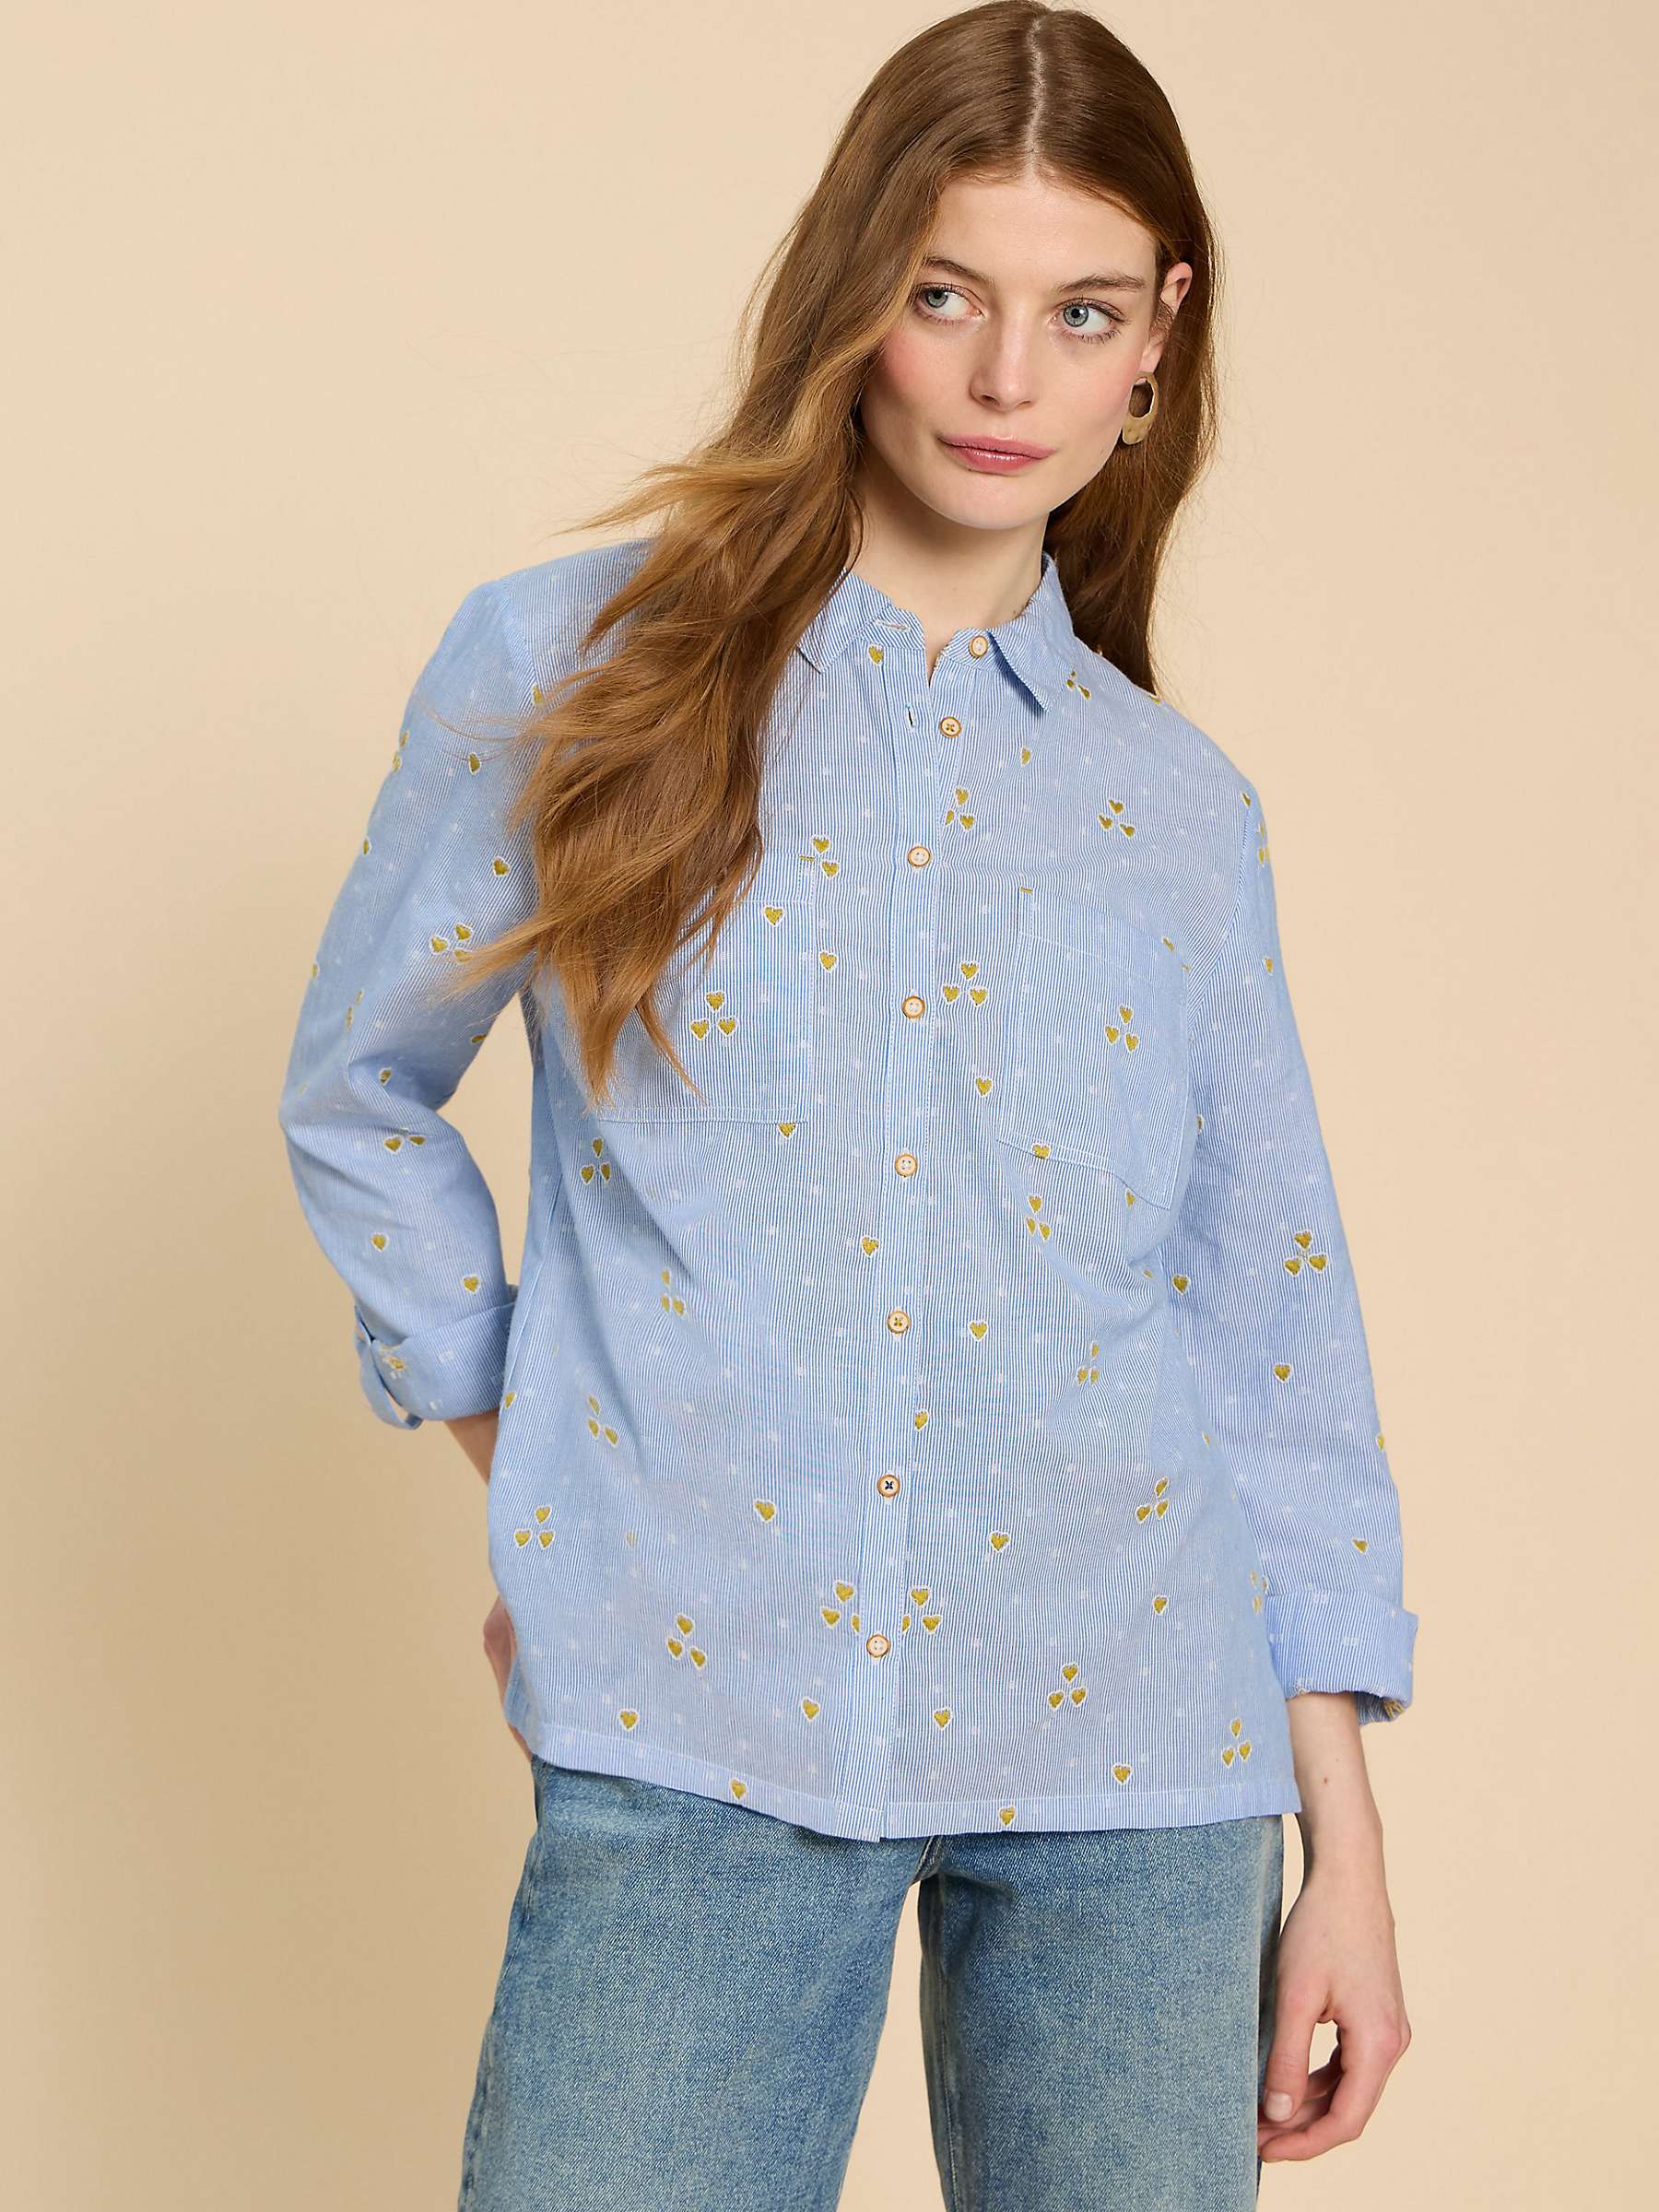 Buy White Stuff Sophie Embroidered Hearts Shirt, Blue/Multi Online at johnlewis.com